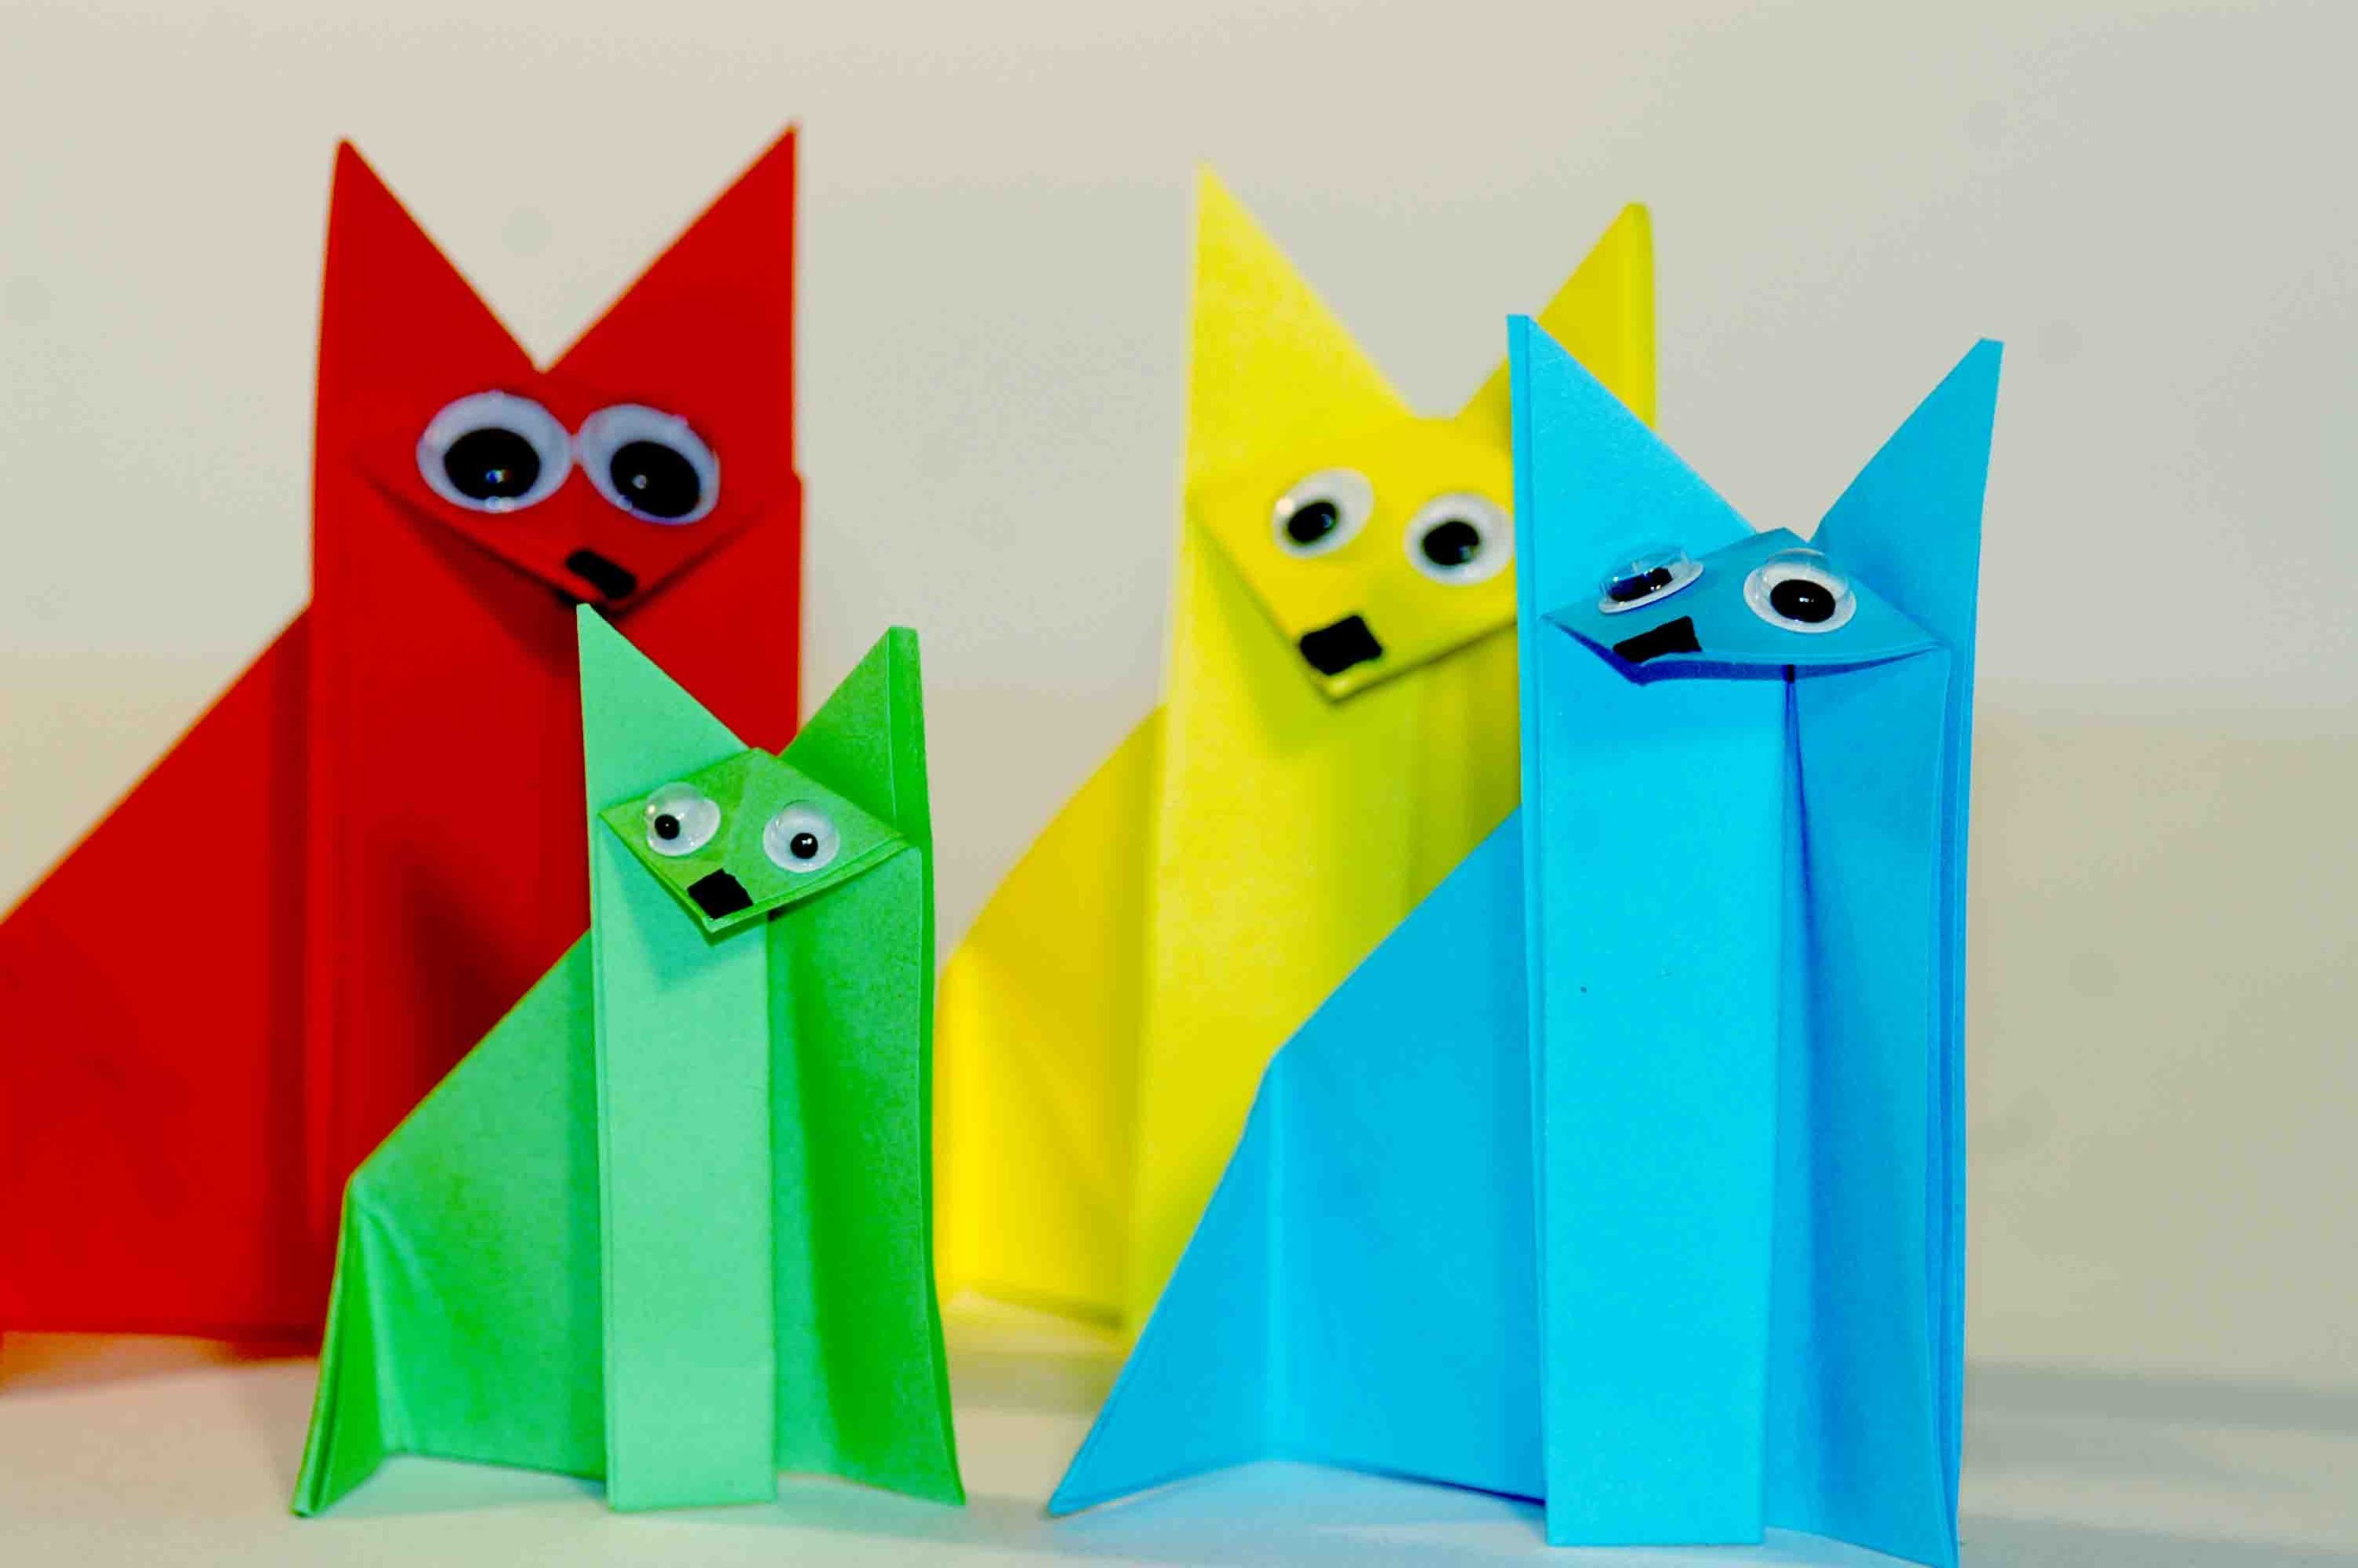 Simple Origami Instructions Asy Origami For Kids Rigami Fox Origami Instructions For Kids